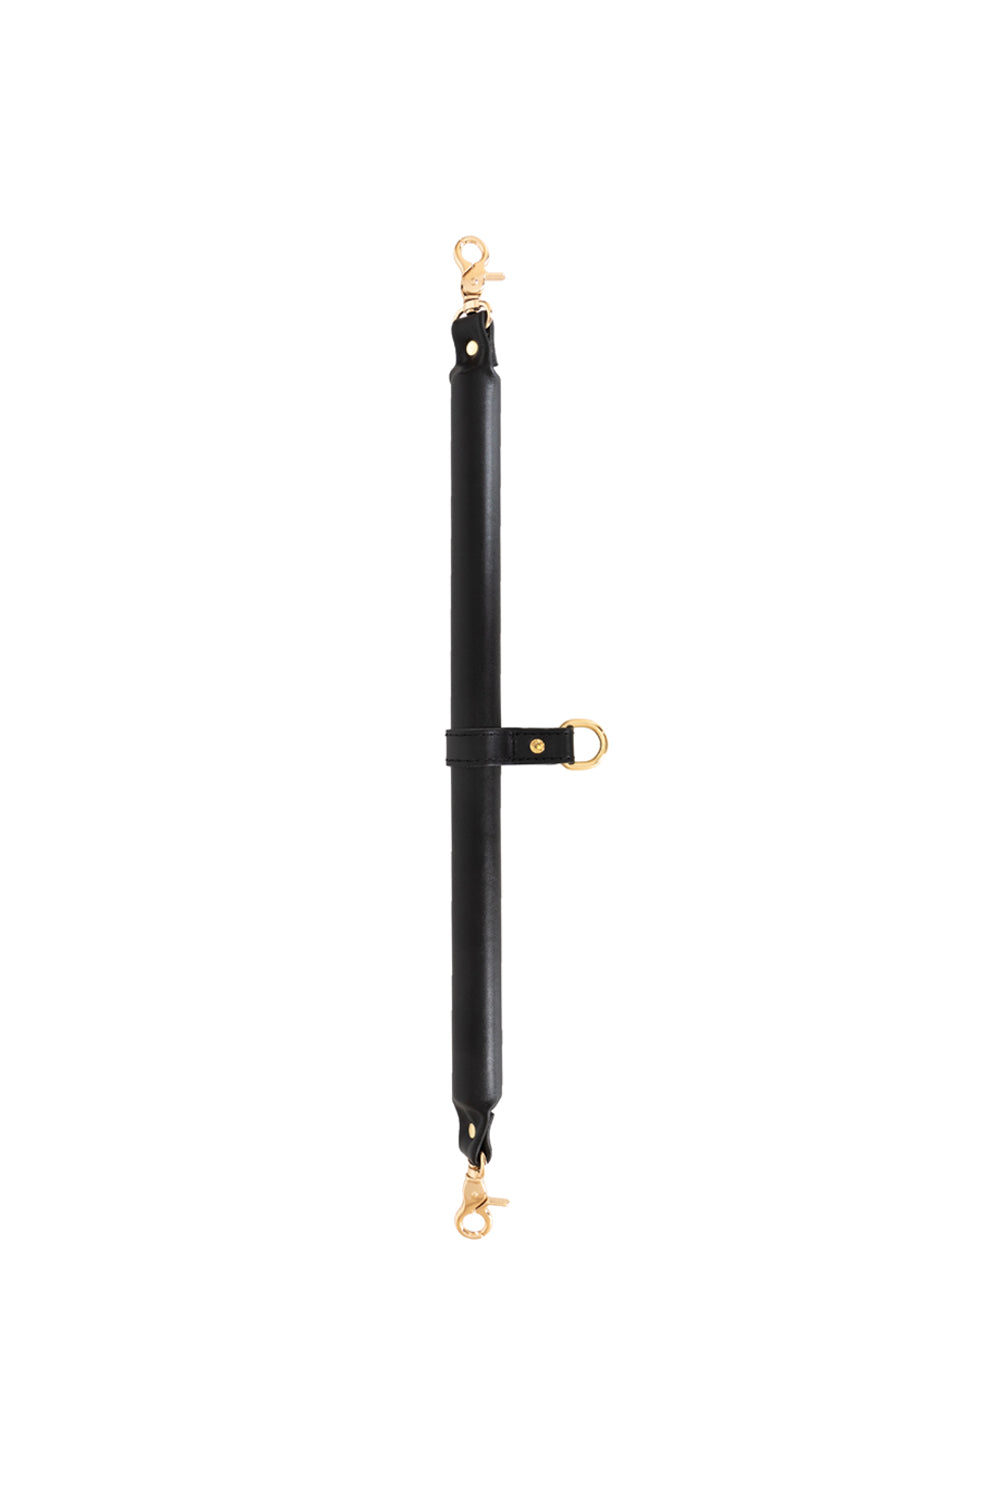 3 Point BDSM Leather Spreader Bar with cuff hooks